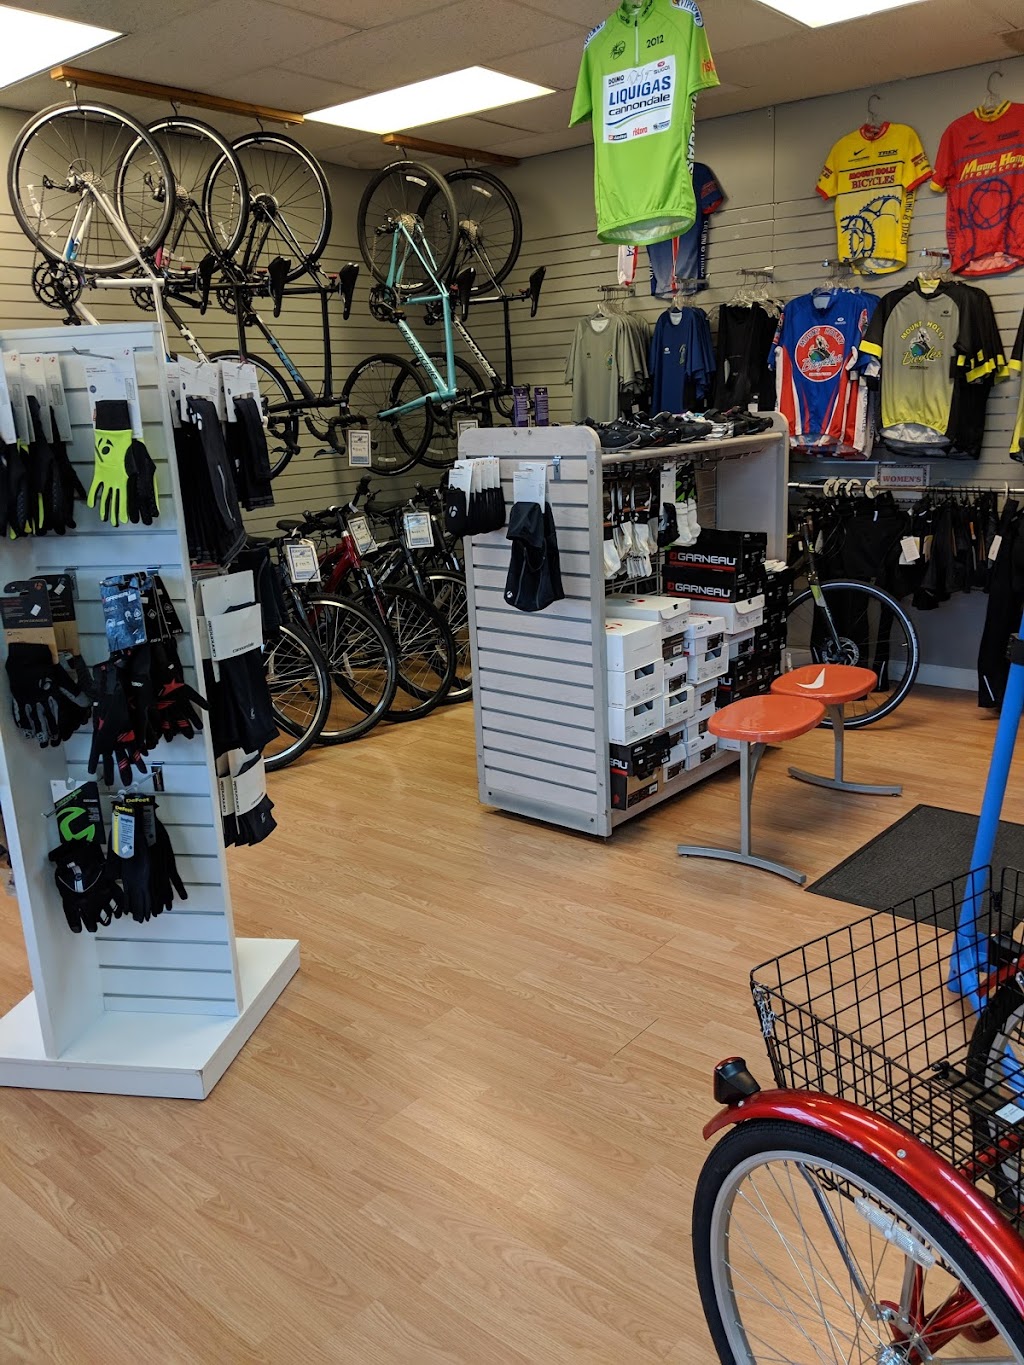 Mount Holly Bicycles | 1645 NJ-38, Mt Holly, NJ 08060 | Phone: (609) 267-6620